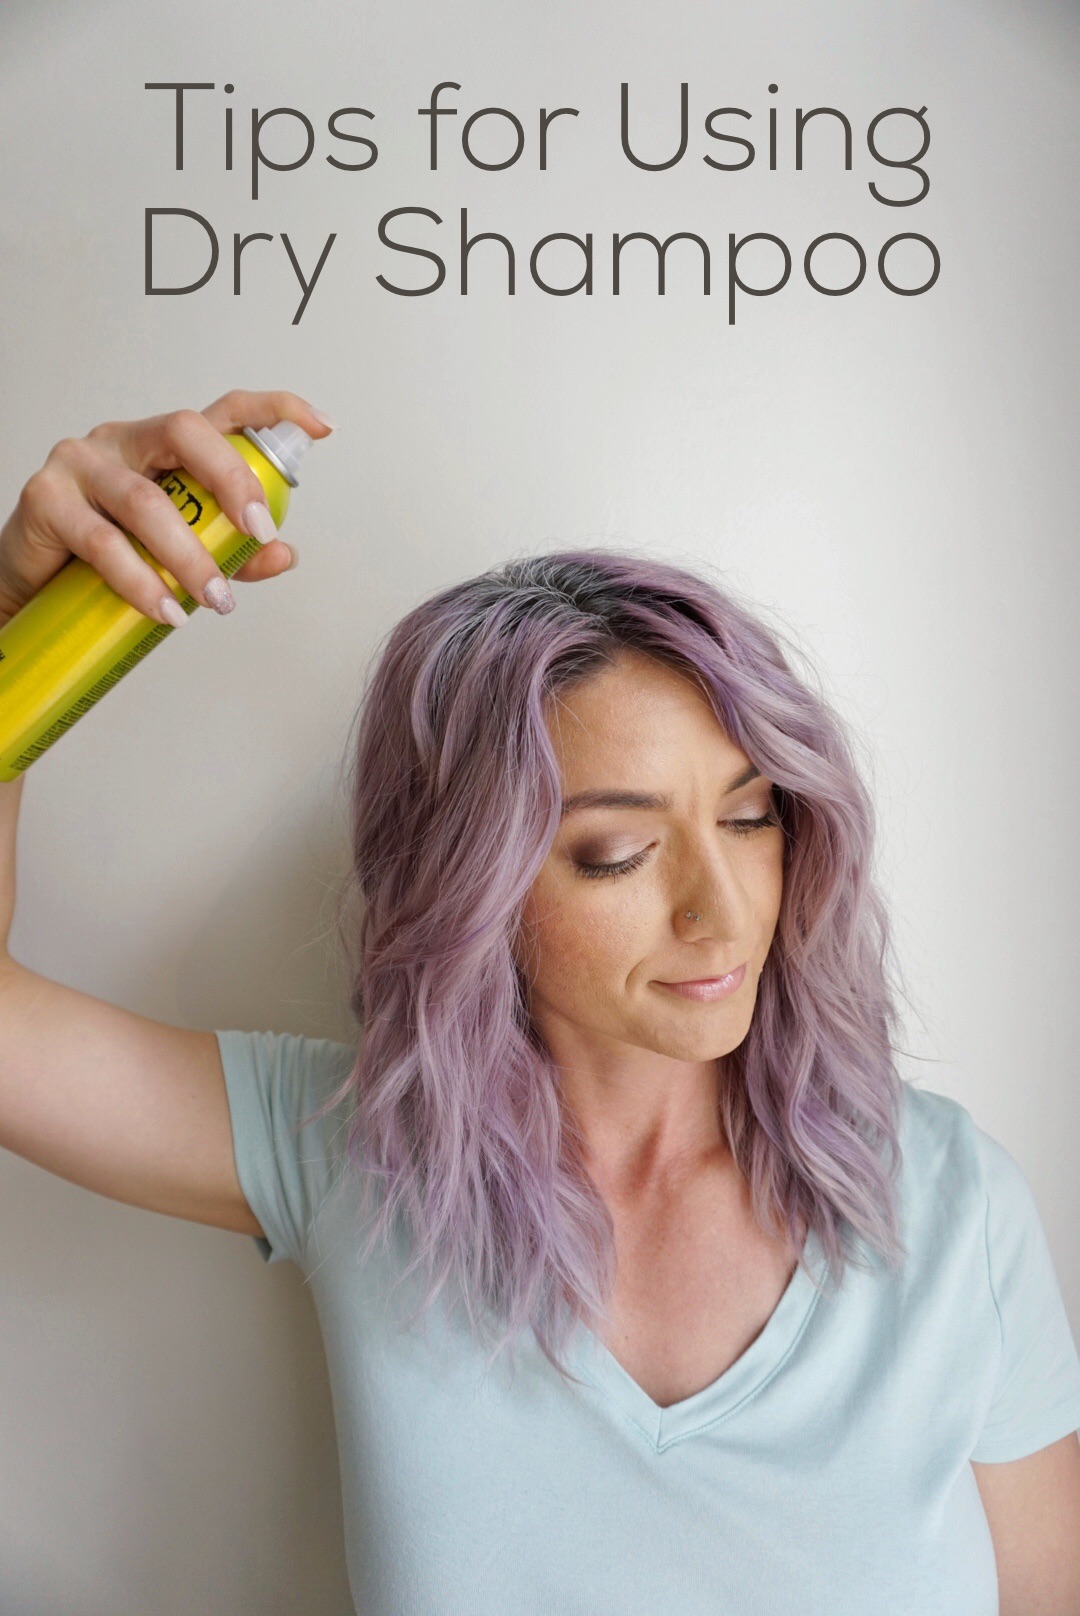 Tips for Using Dry Shampoo - Cute Girls Hairstyles